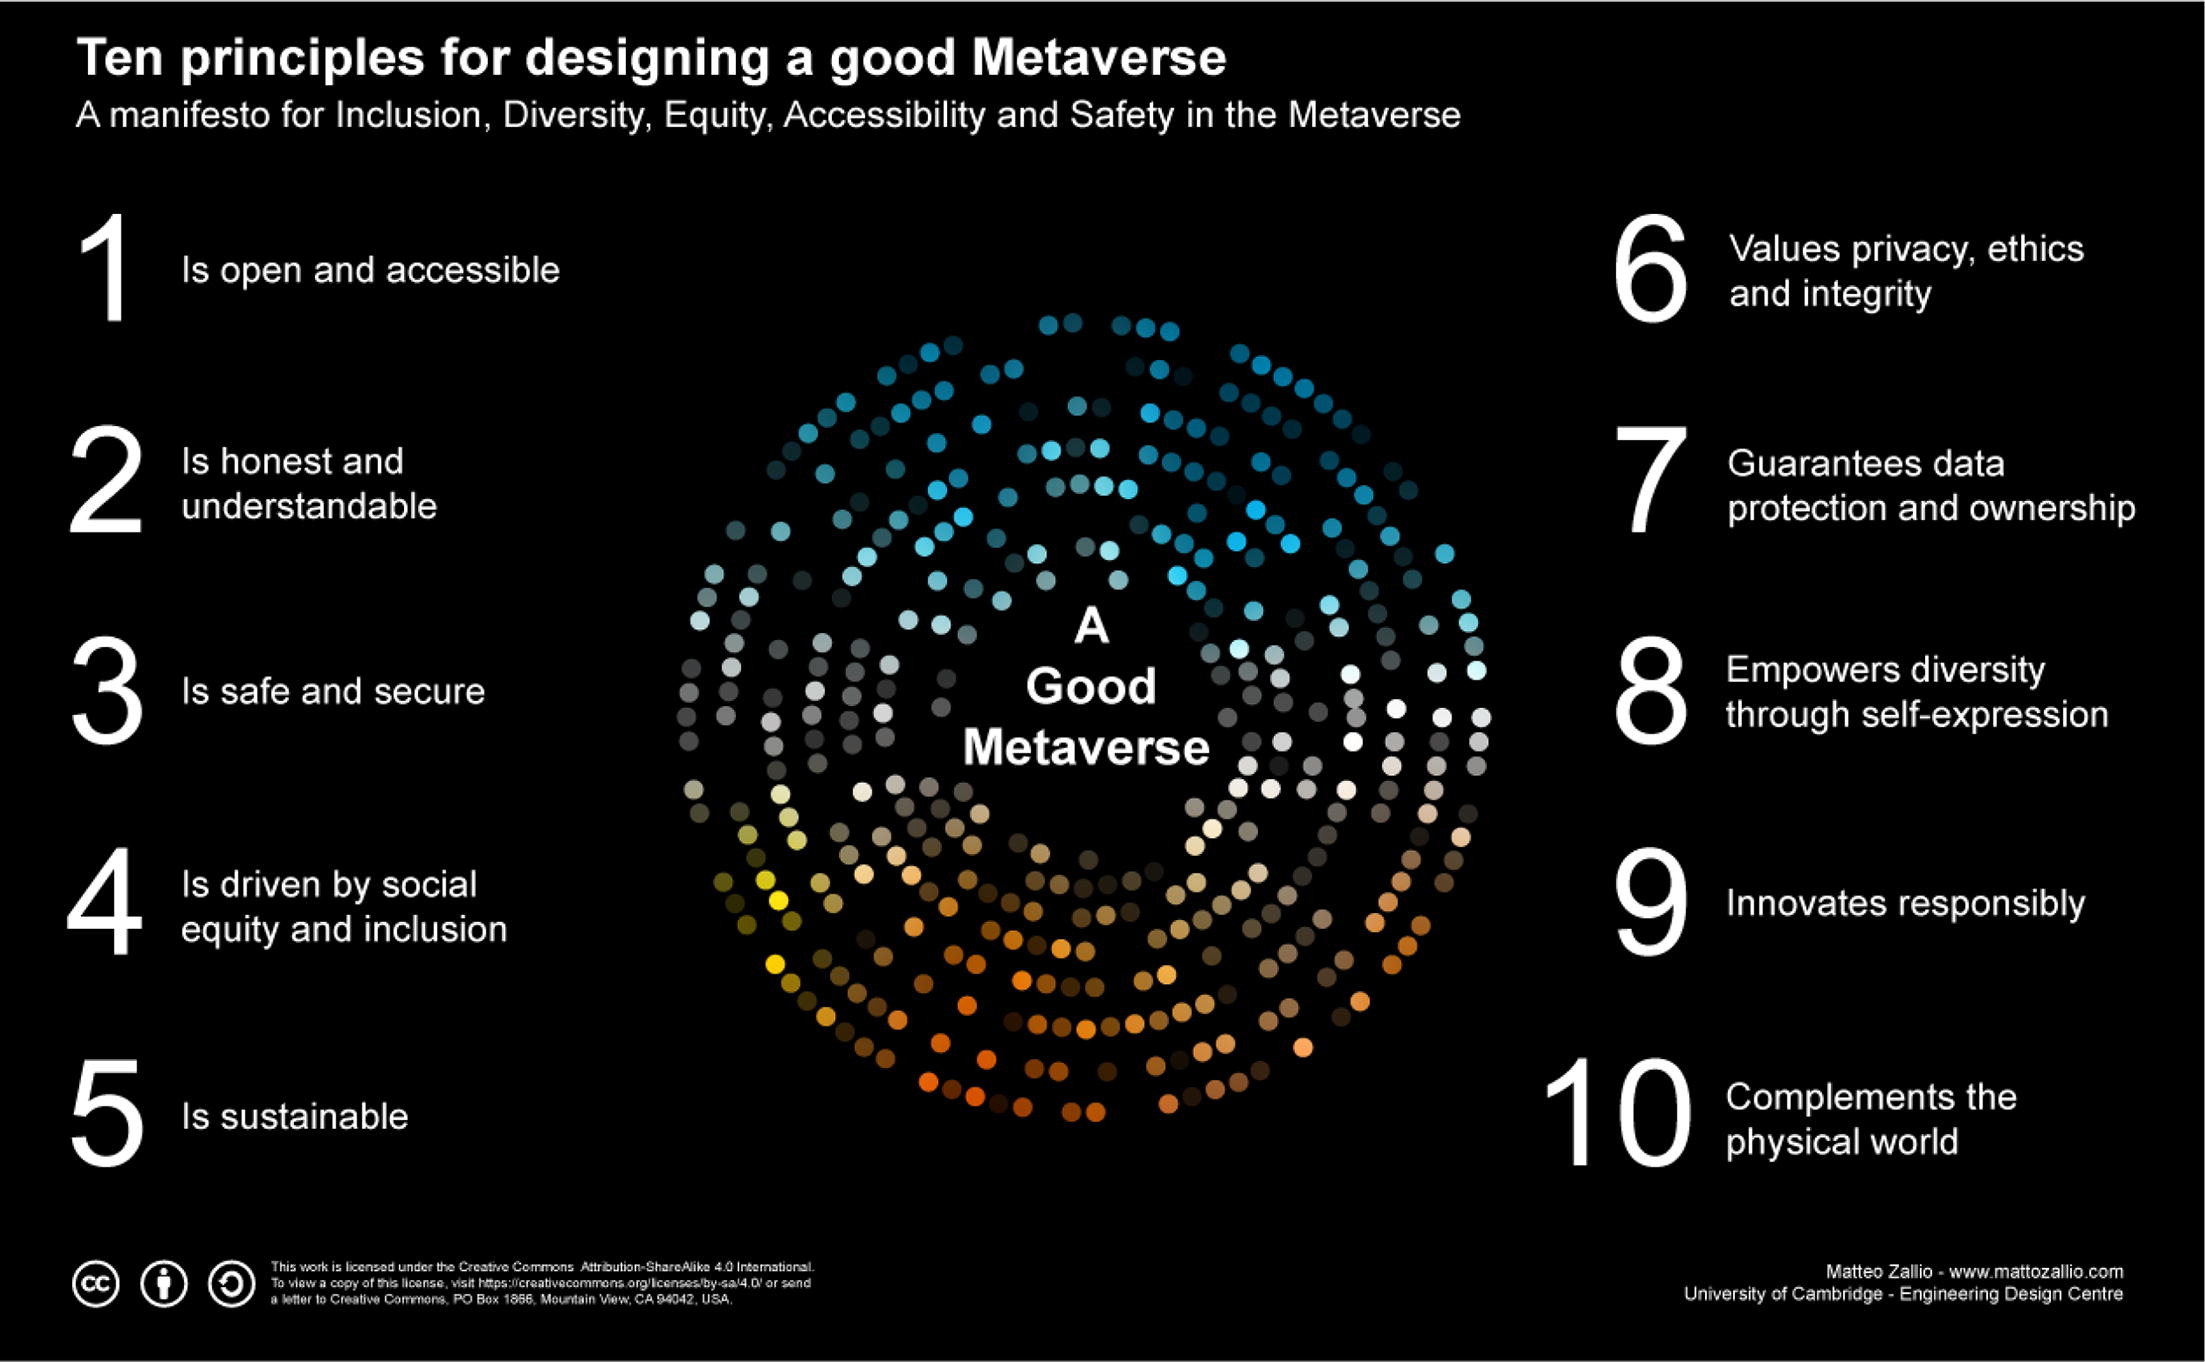 Diagram showing the 10 principles for designing a good Metaverse.